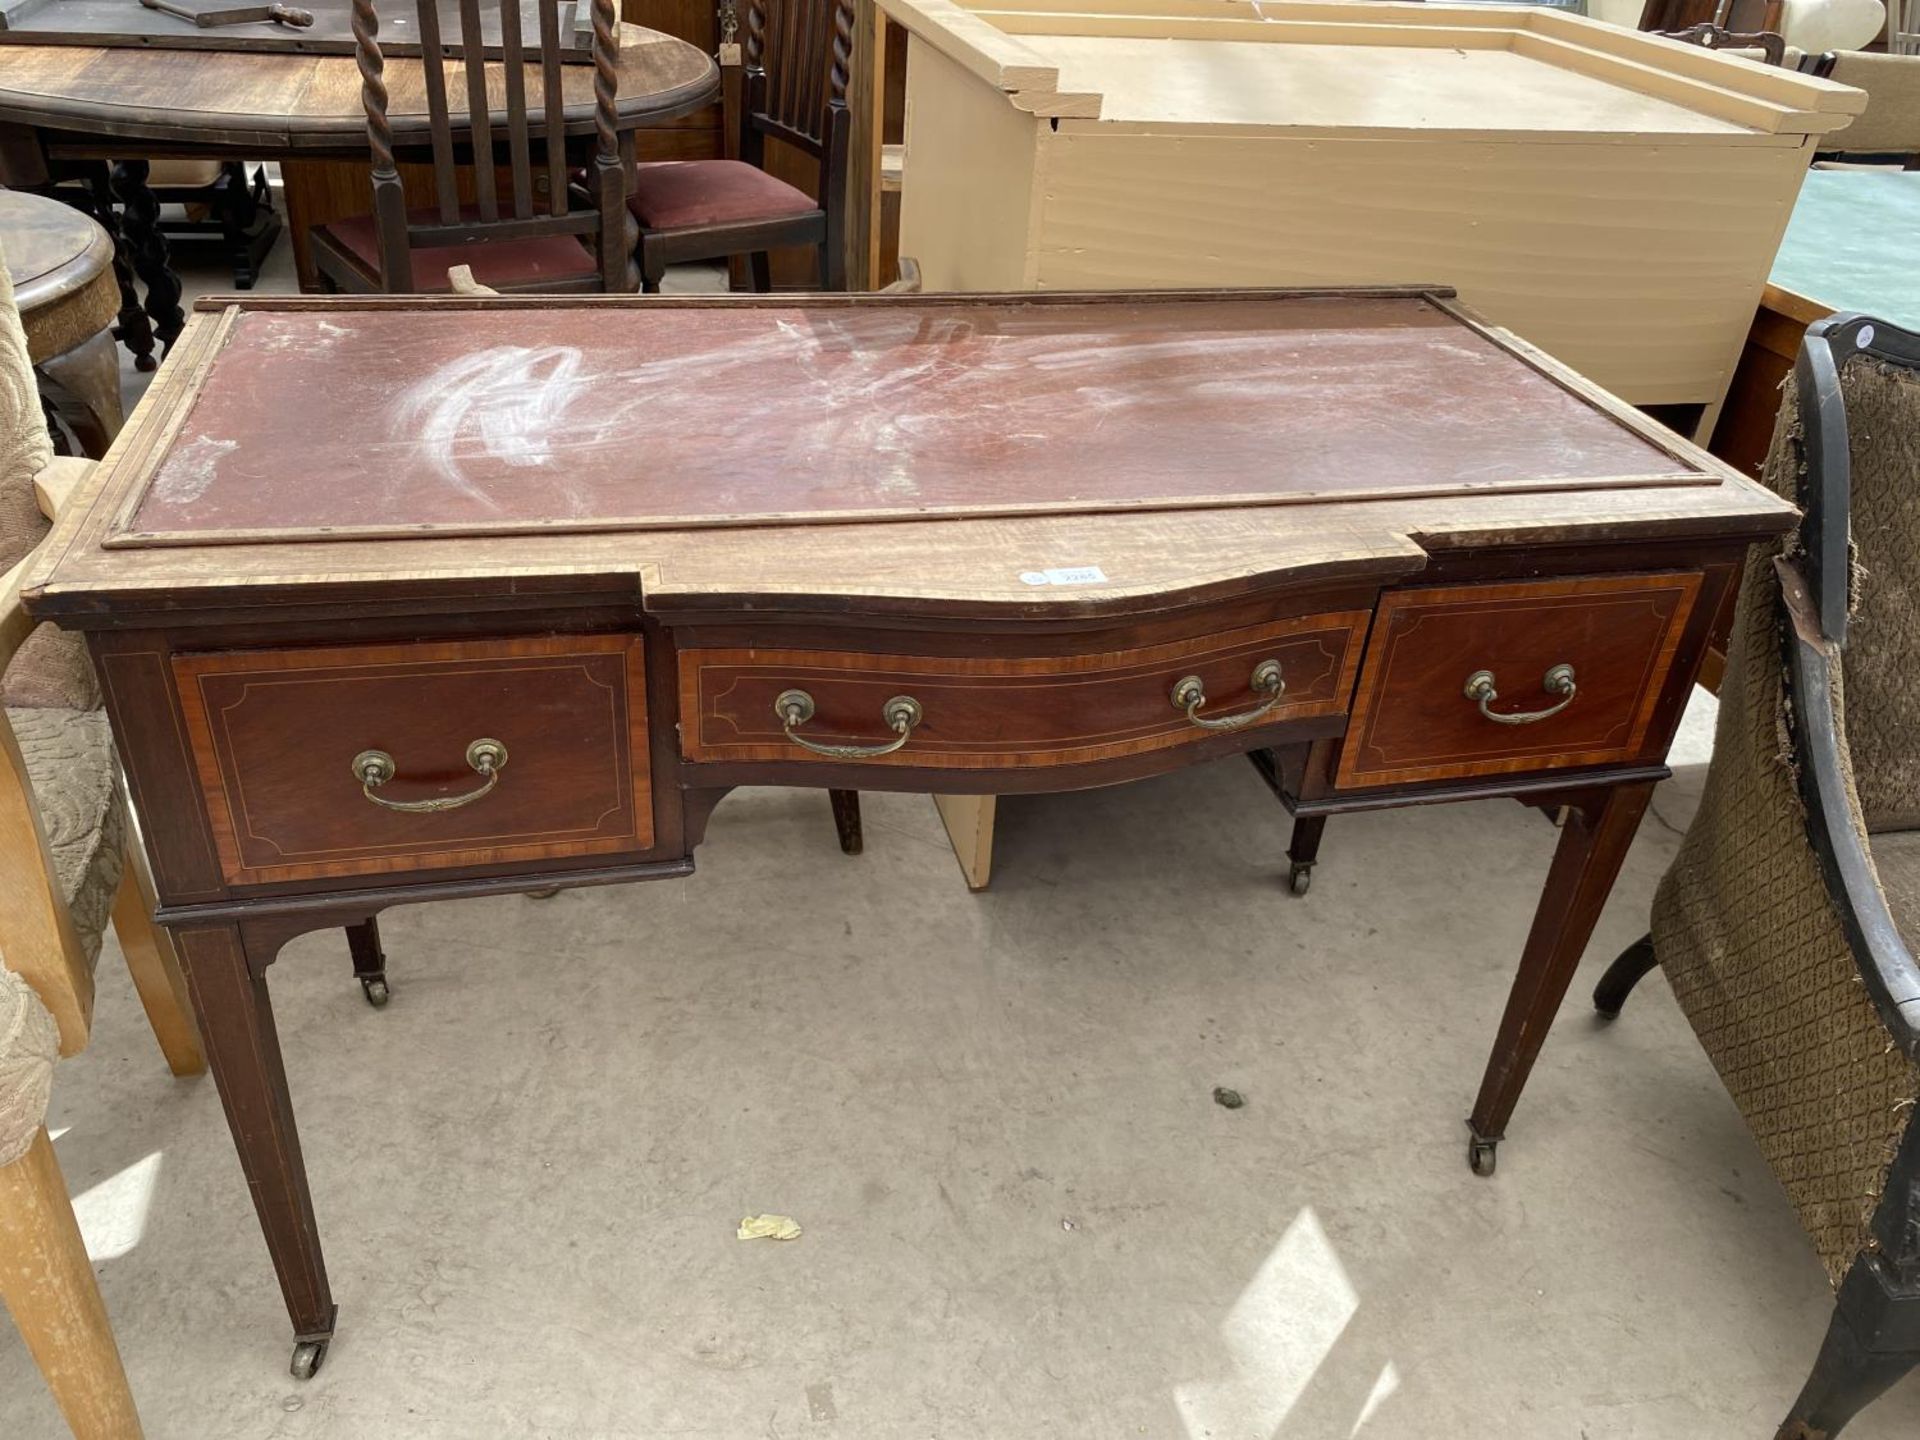 AN EDWARDIAN AND MAHOGANY INLAY DESK ON TAPERED LEGS AND SPADE FEET